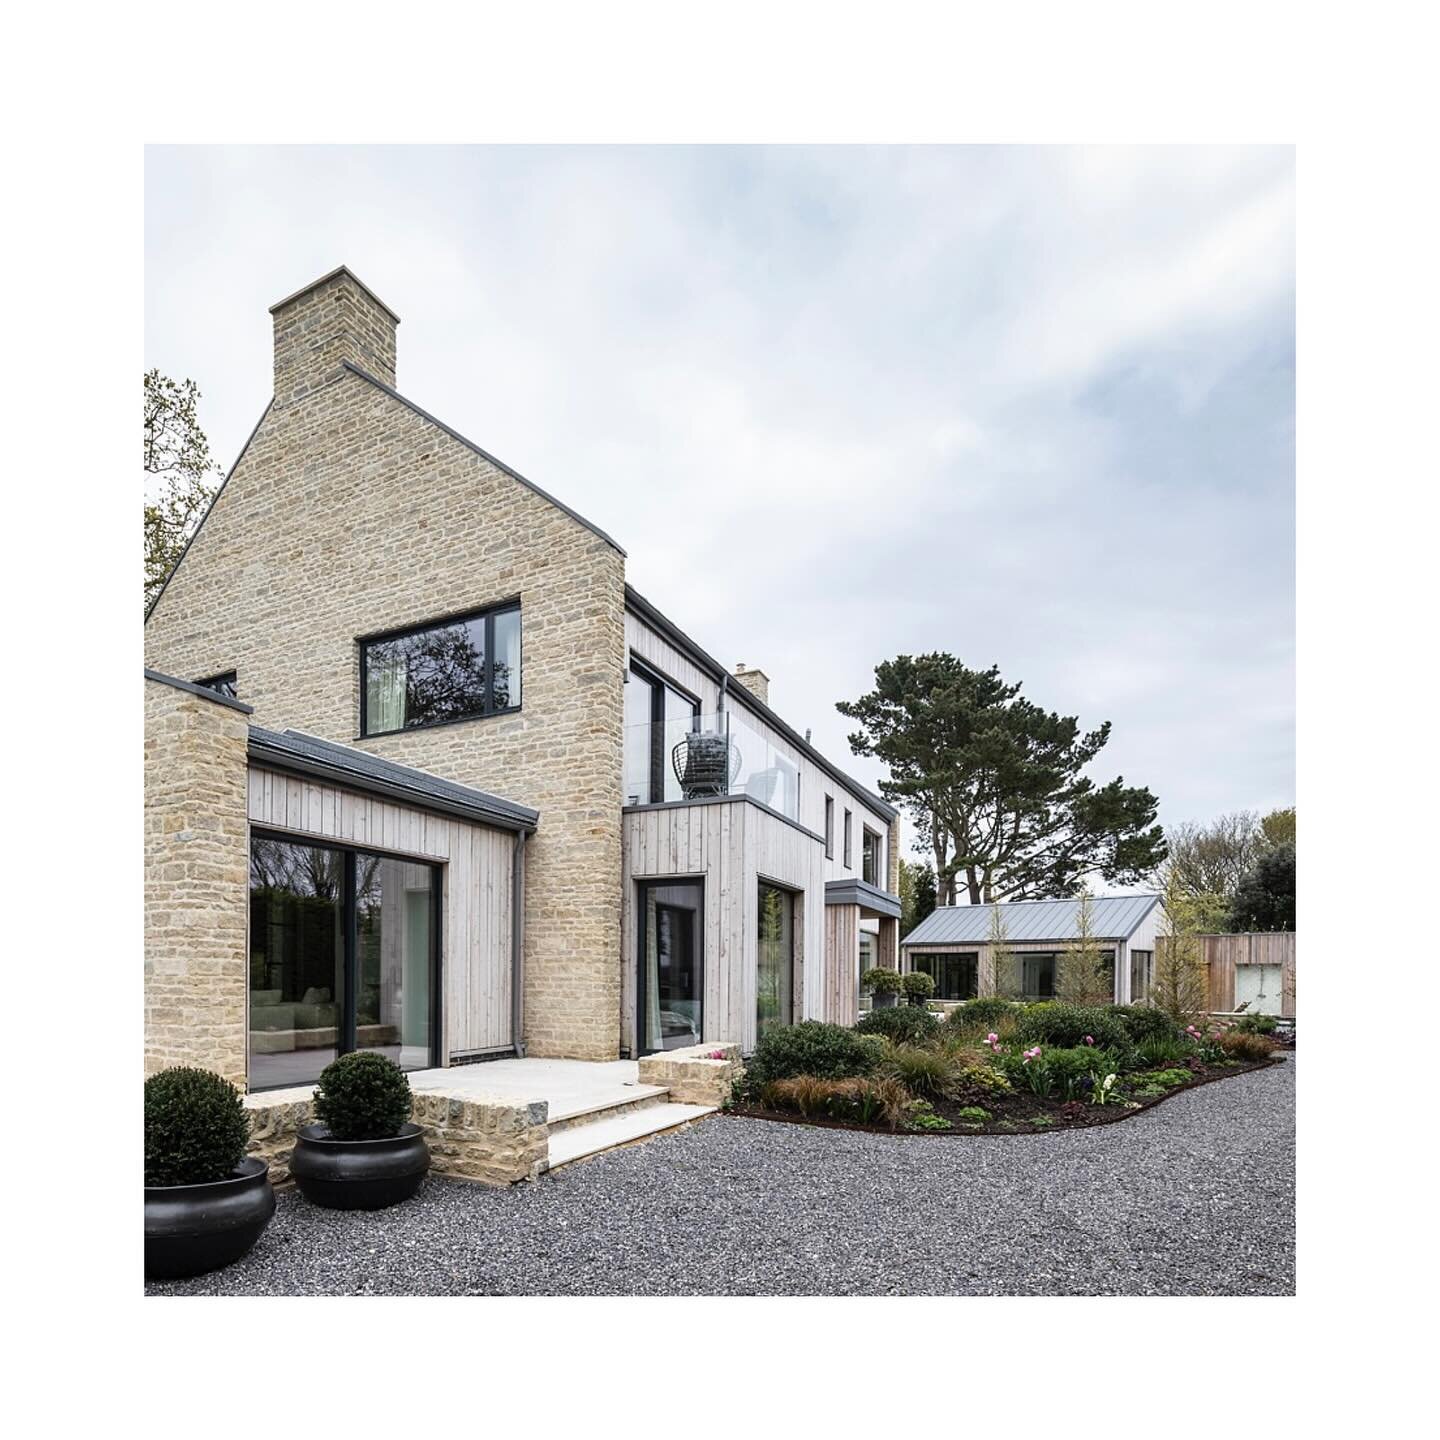 📍Orchard House, PO20

A stunning new build with modern interiors and gorgeous sea views. Available for large film and photoshoots.

Highlights✨
&nbsp;&nbsp;&nbsp;&nbsp;&bull;&nbsp;&nbsp;&nbsp;&nbsp;Contemporary glass-house style
&nbsp;&nbsp;&nbsp;&n